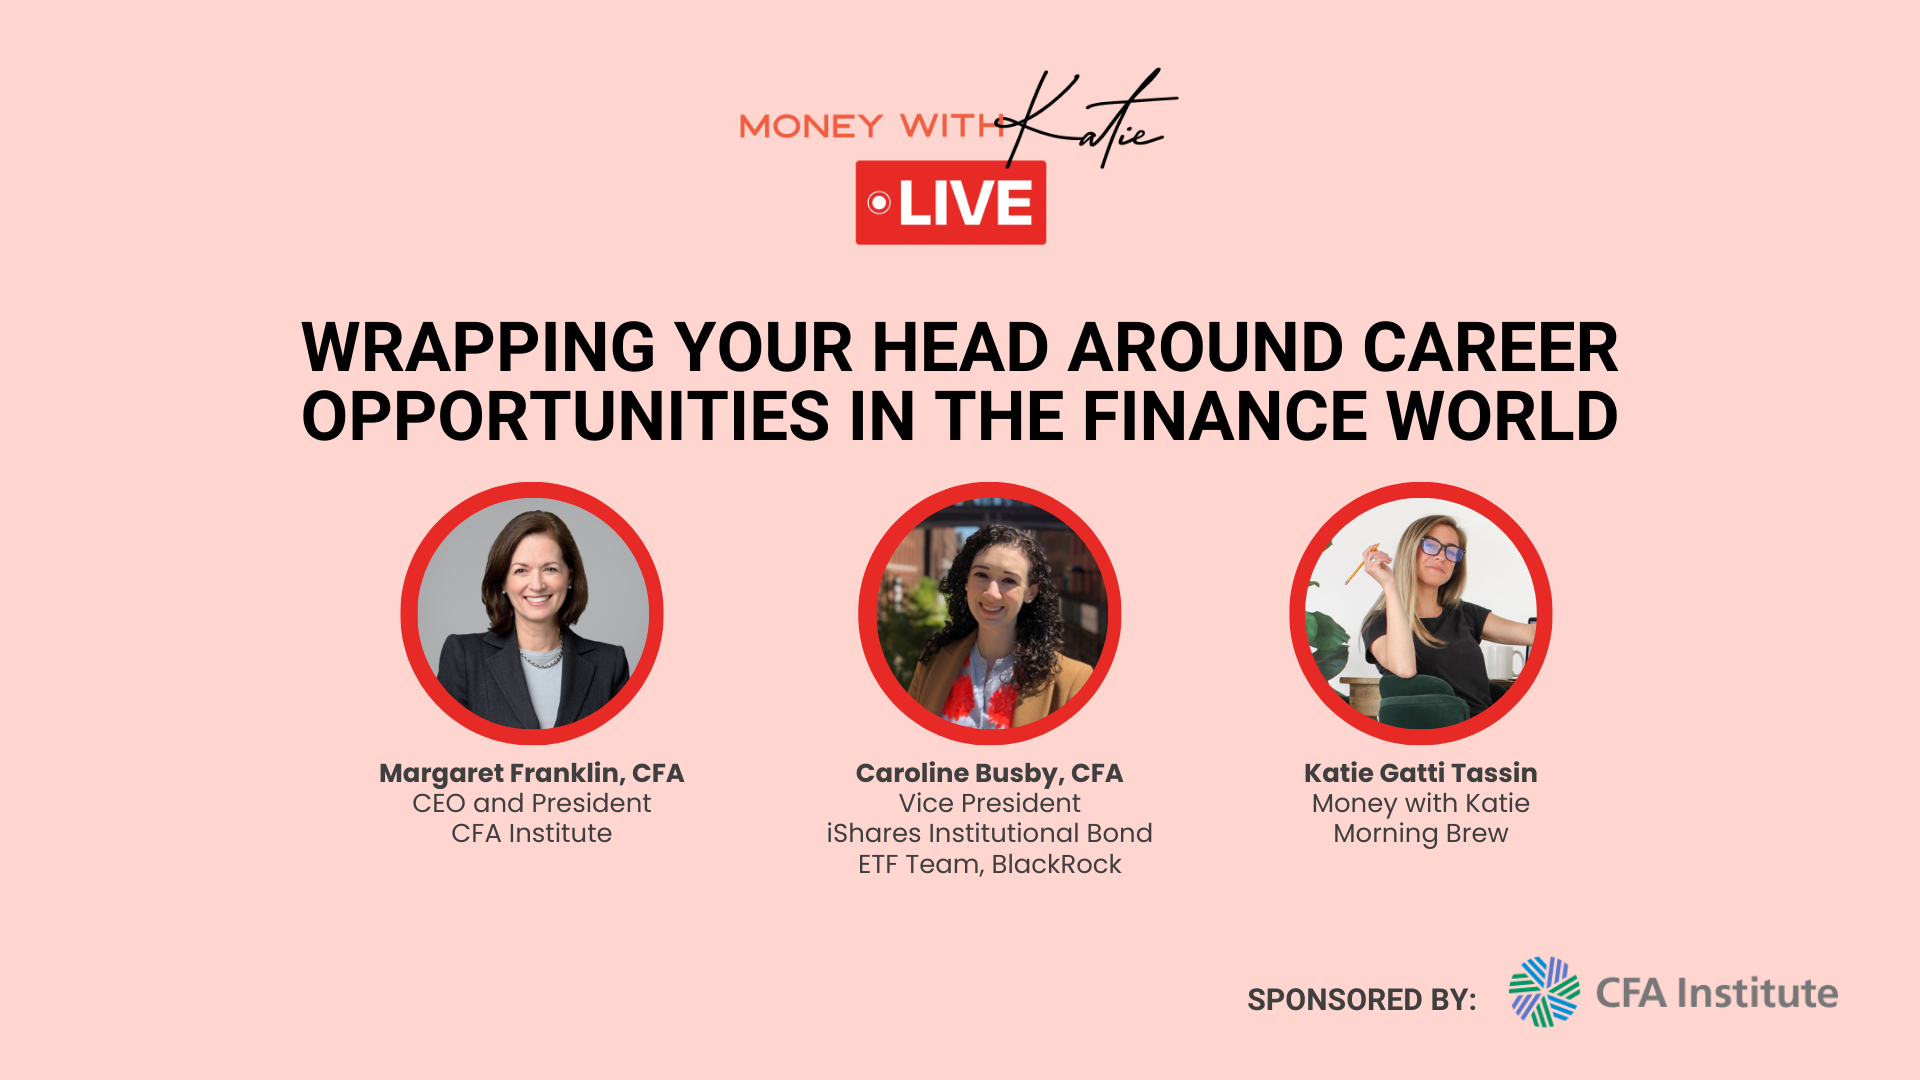 Money with Katie Live logo with "Wrapping Your Head Around Career Opportunities in the Finance World" text with three presenter headshots and "Sponsored by: CFA institute" text